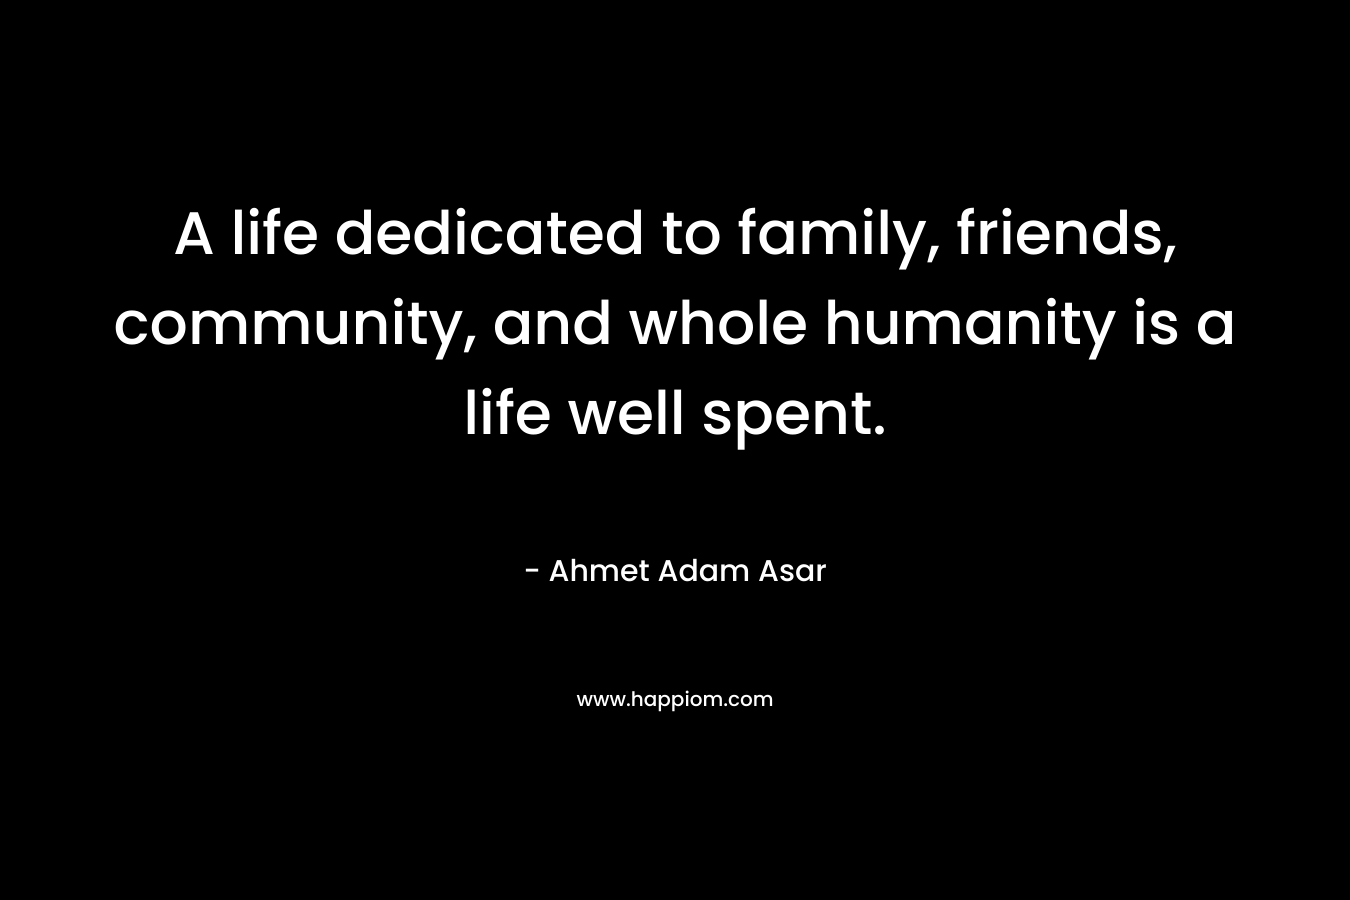 A life dedicated to family, friends, community, and whole humanity is a life well spent.